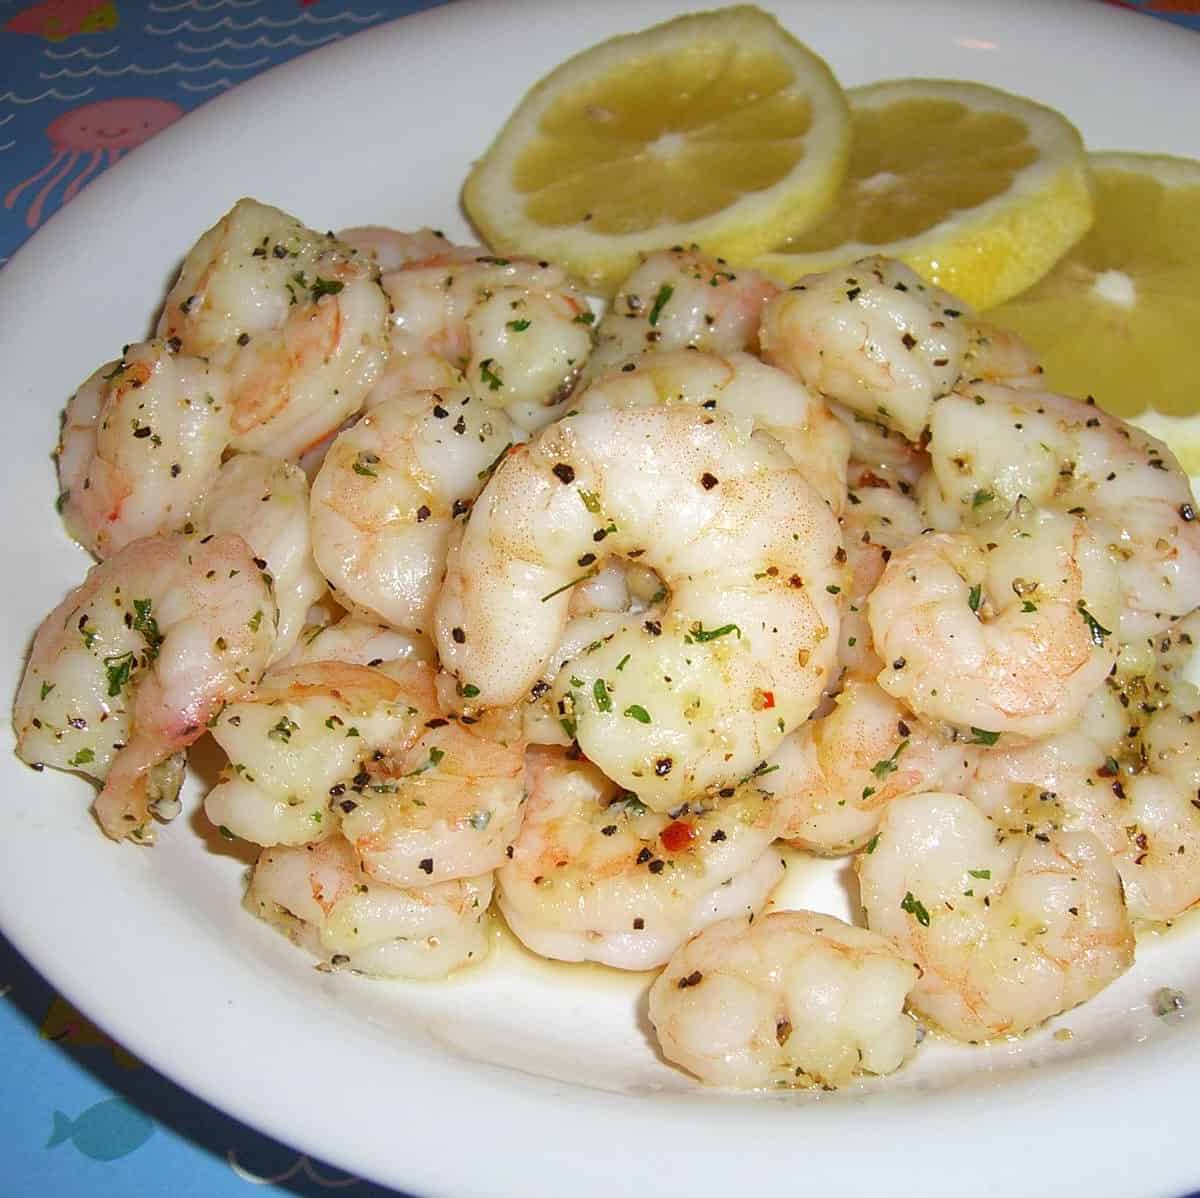  Juicy and succulent shrimp, roasted to perfection